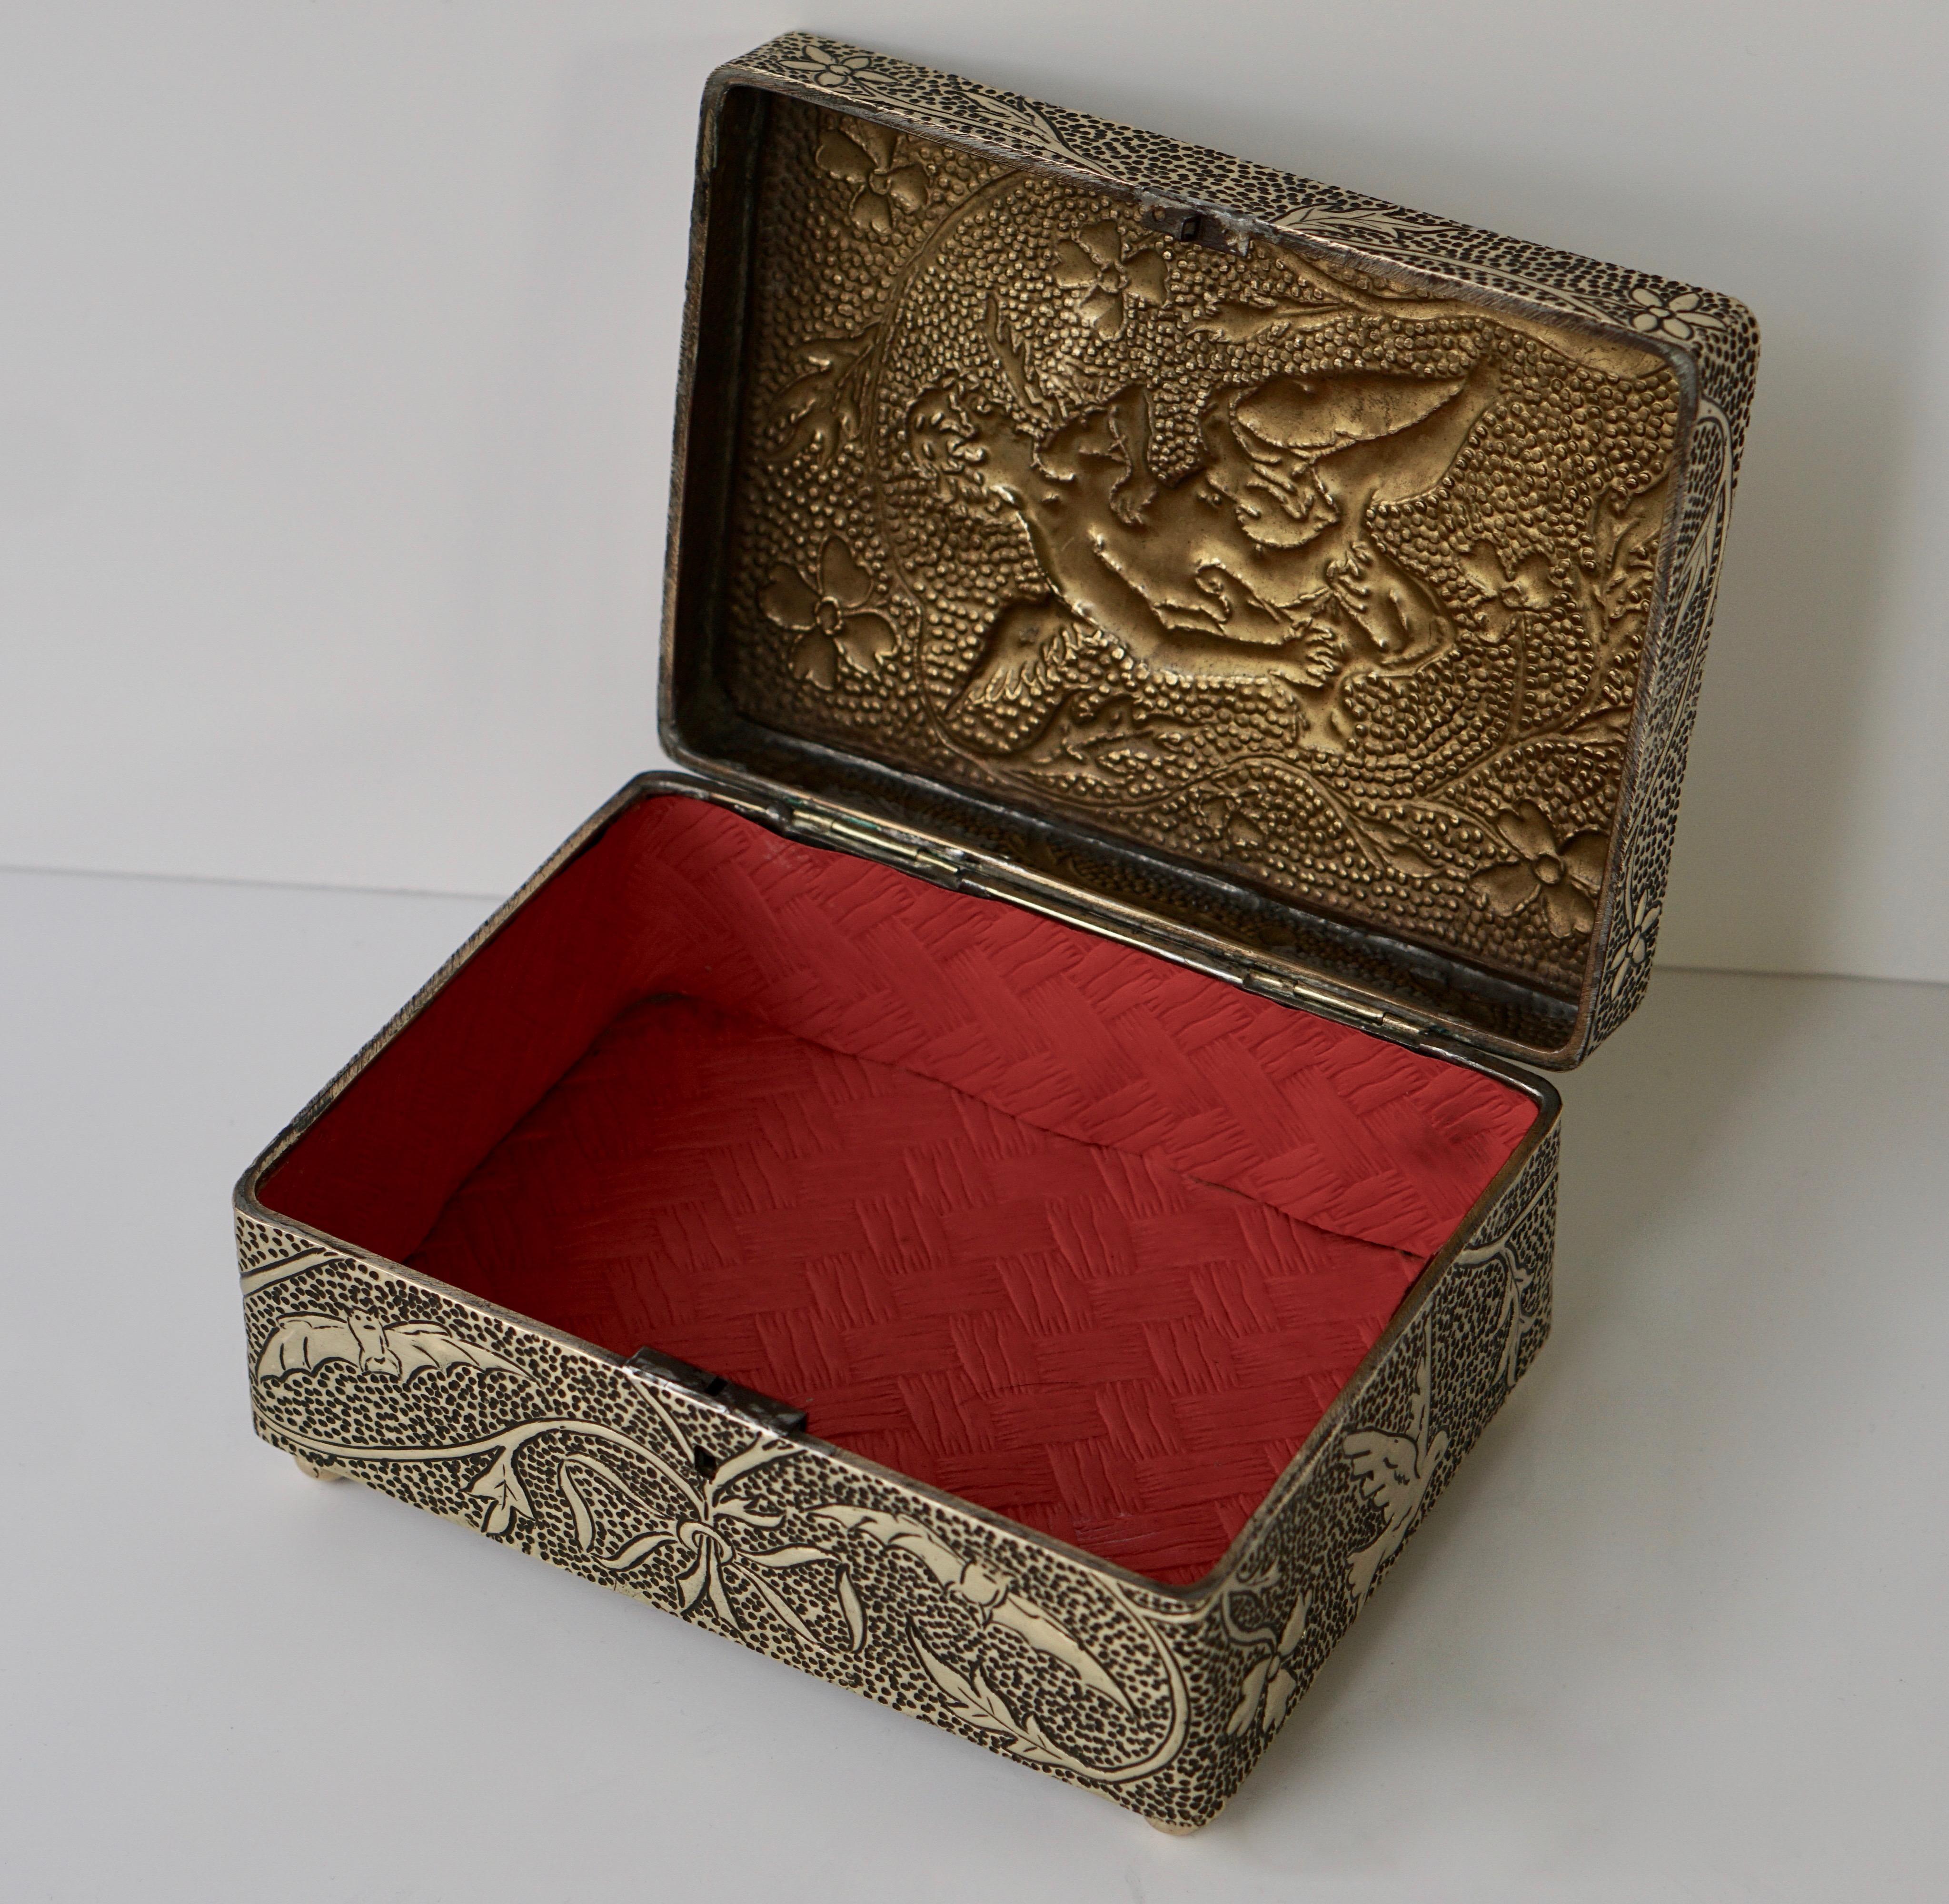 20th Century France Art Nouveau Silvered Jewelry Box Casket, circa 1900 For Sale